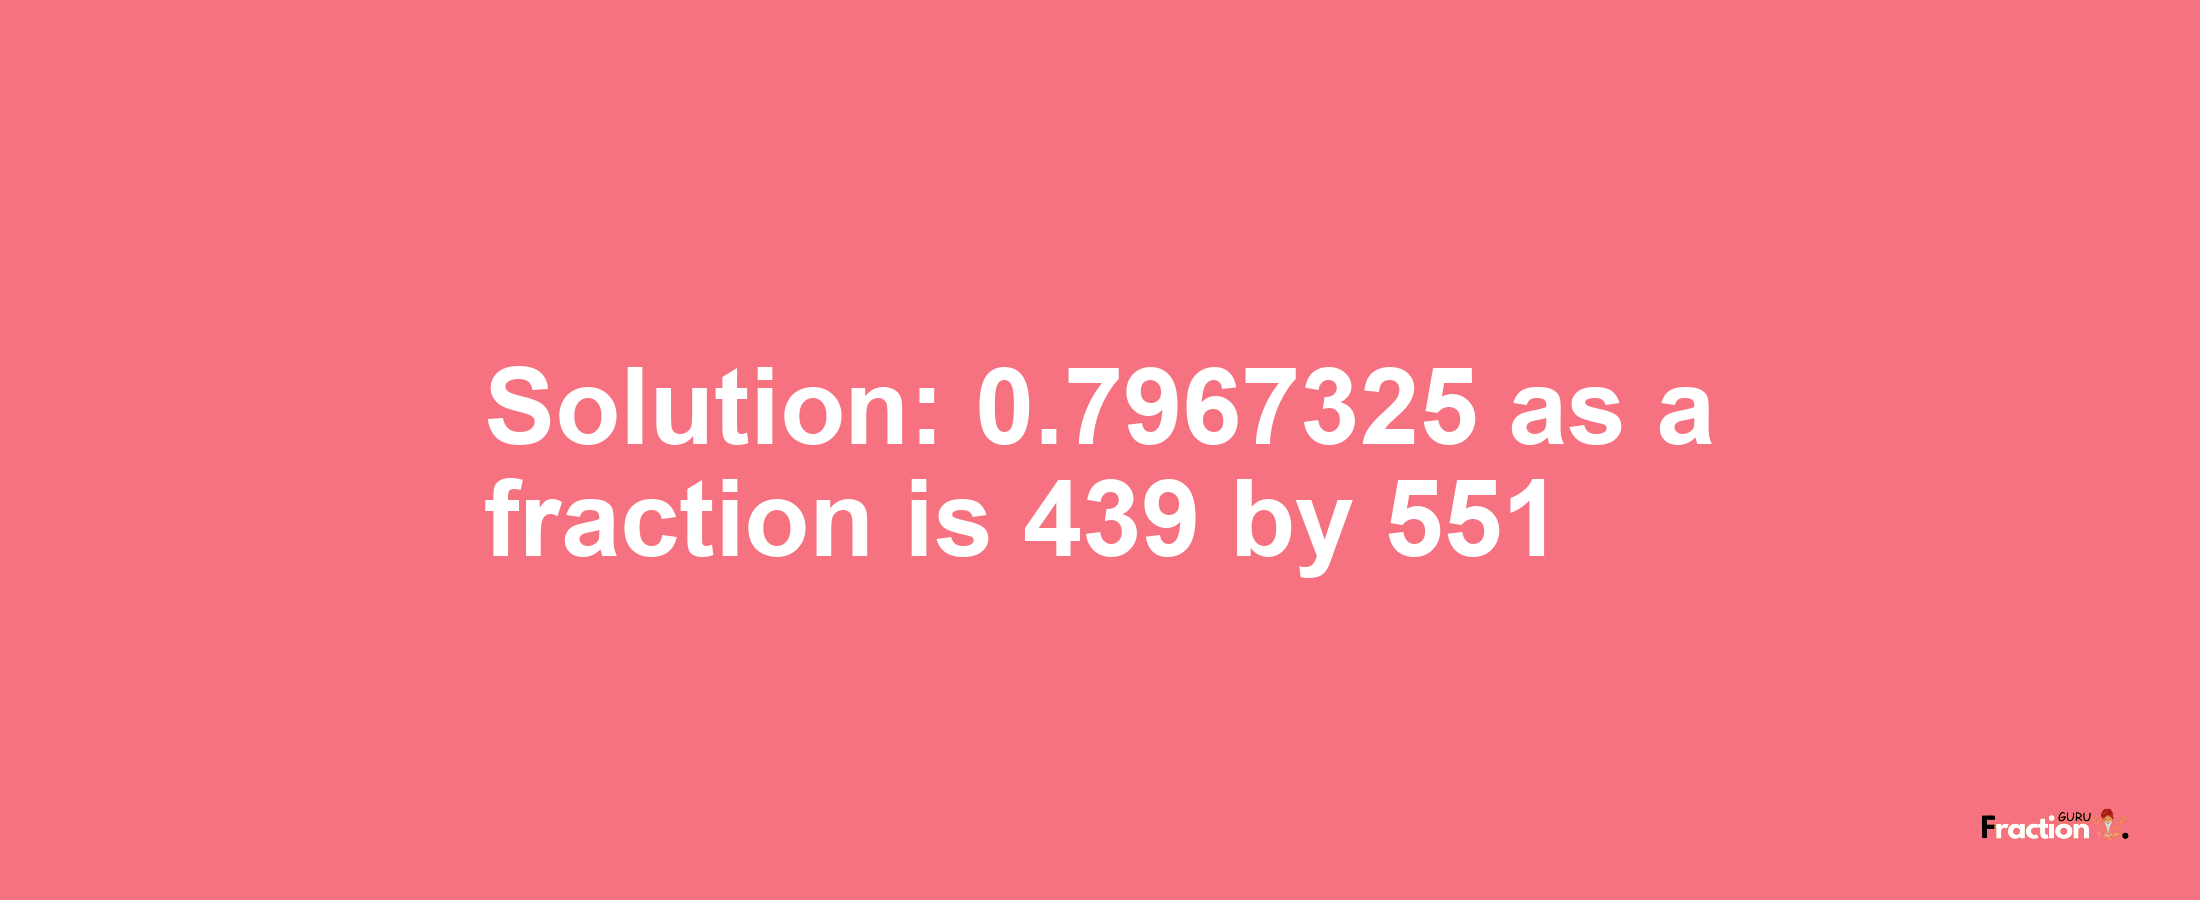 Solution:0.7967325 as a fraction is 439/551